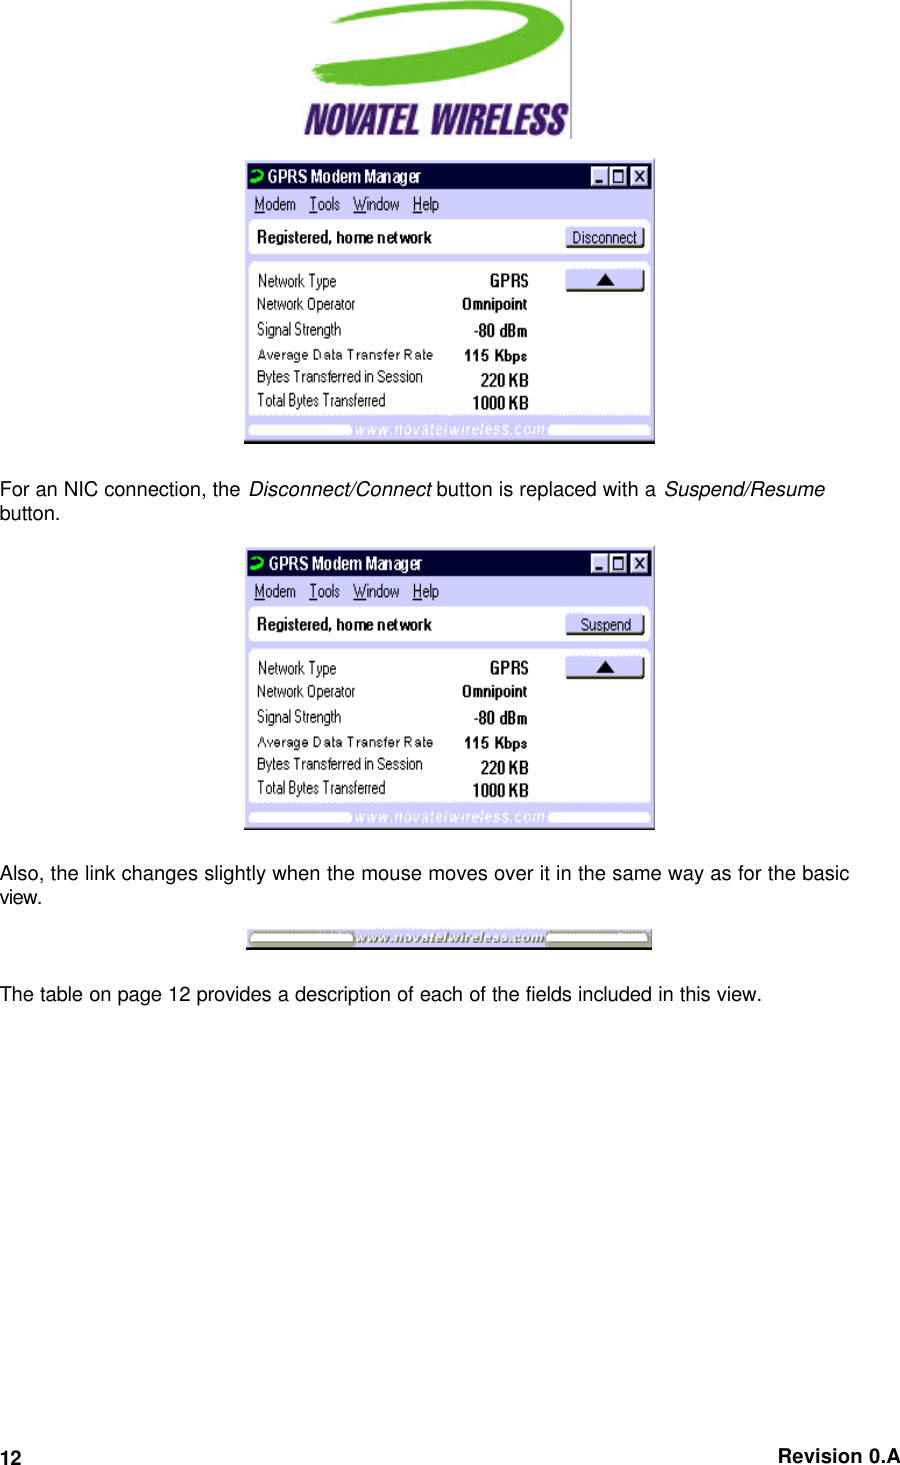   Revision 0.A 12   For an NIC connection, the Disconnect/Connect button is replaced with a Suspend/Resume button.   Also, the link changes slightly when the mouse moves over it in the same way as for the basic view.   The table on page 12 provides a description of each of the fields included in this view. 